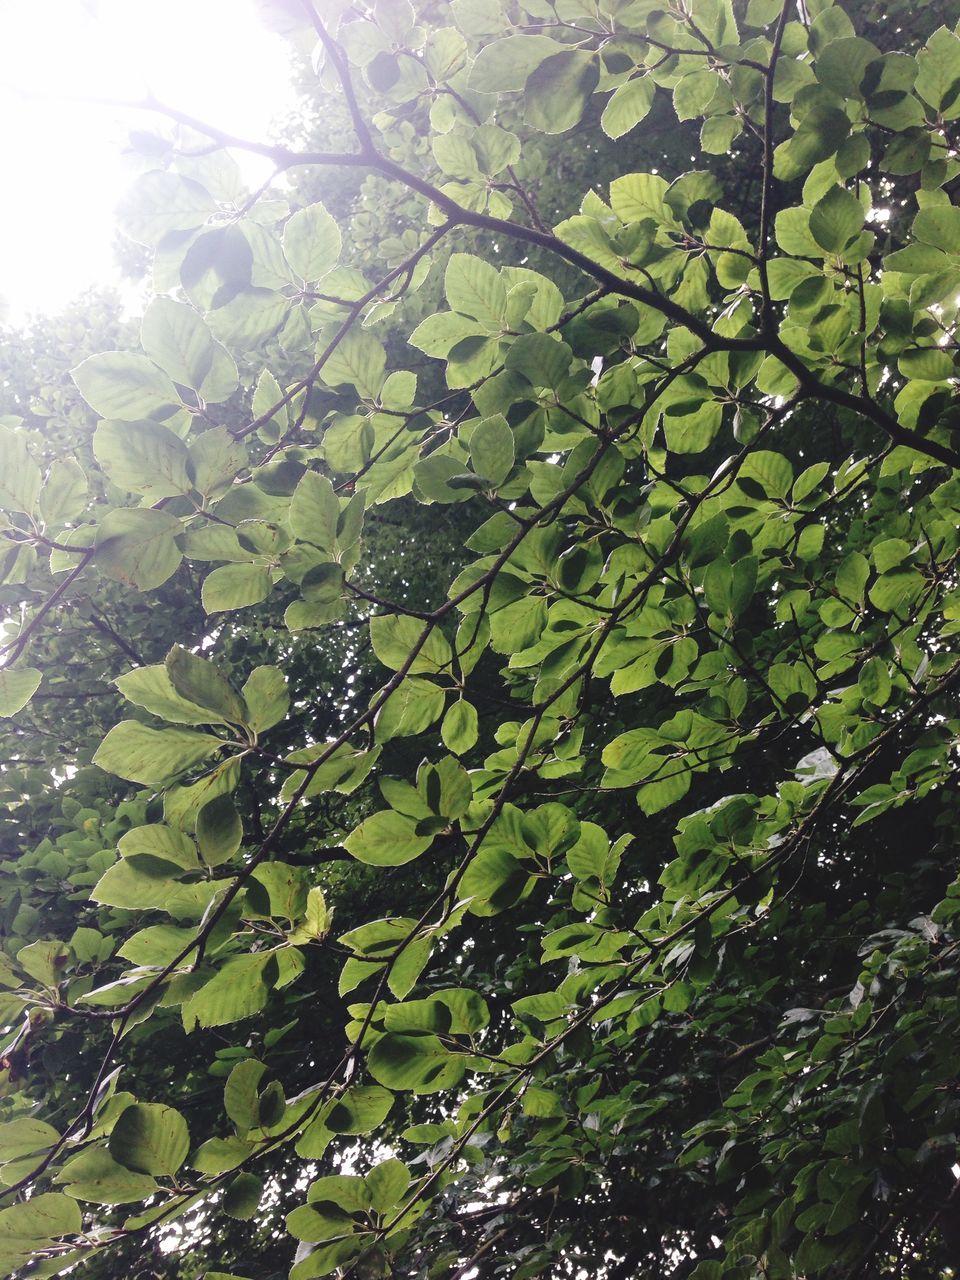 tree, growth, leaf, branch, green color, low angle view, nature, tranquility, beauty in nature, lush foliage, day, green, sunlight, outdoors, plant, no people, forest, scenics, freshness, close-up